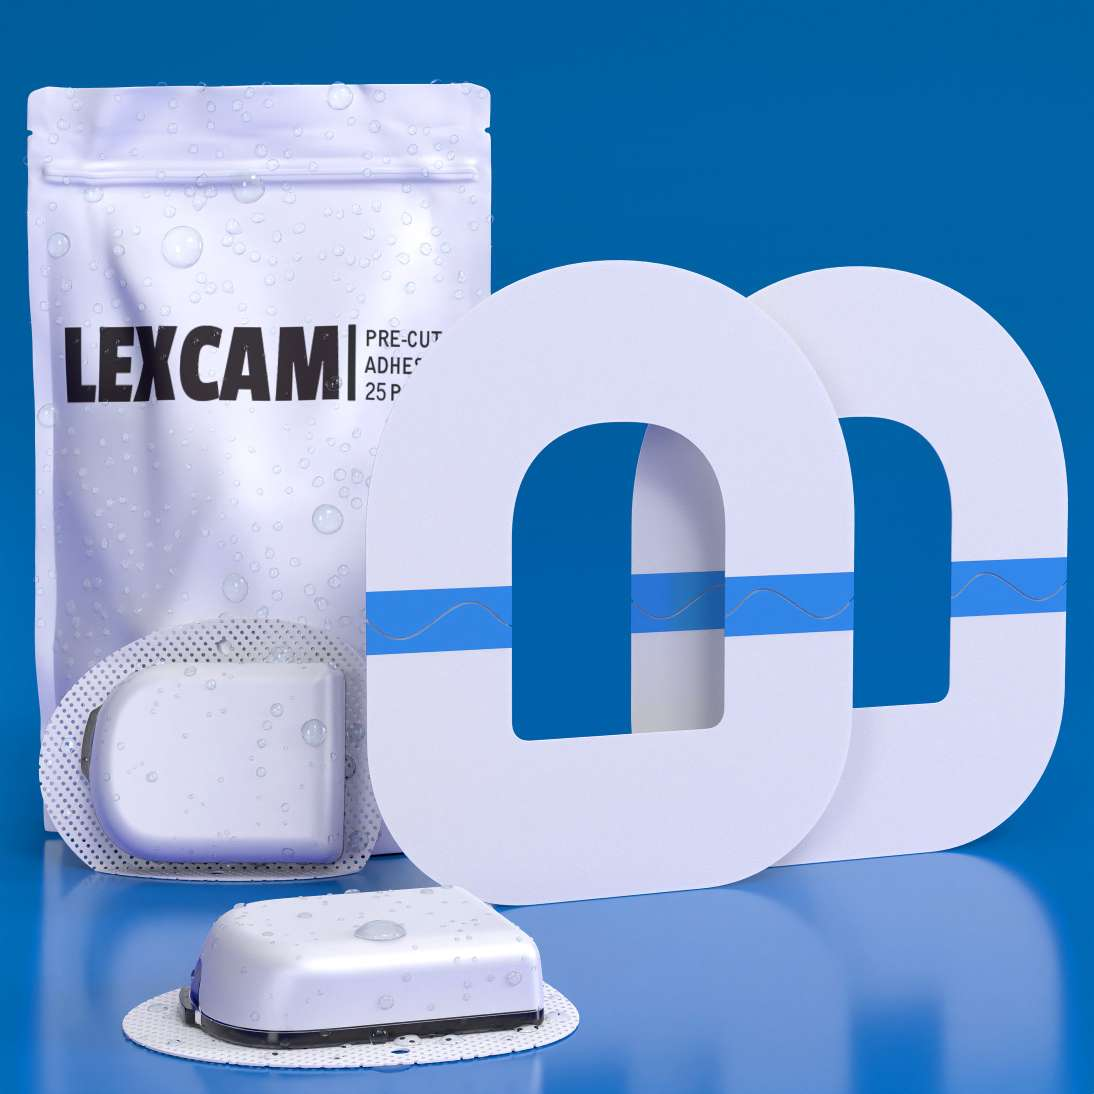 Lexcam Adhesive Waterproof Patches – (25-Pack) – Pre-Cut for Omnipod Hypoallergenic CGM Tape - Color Clear